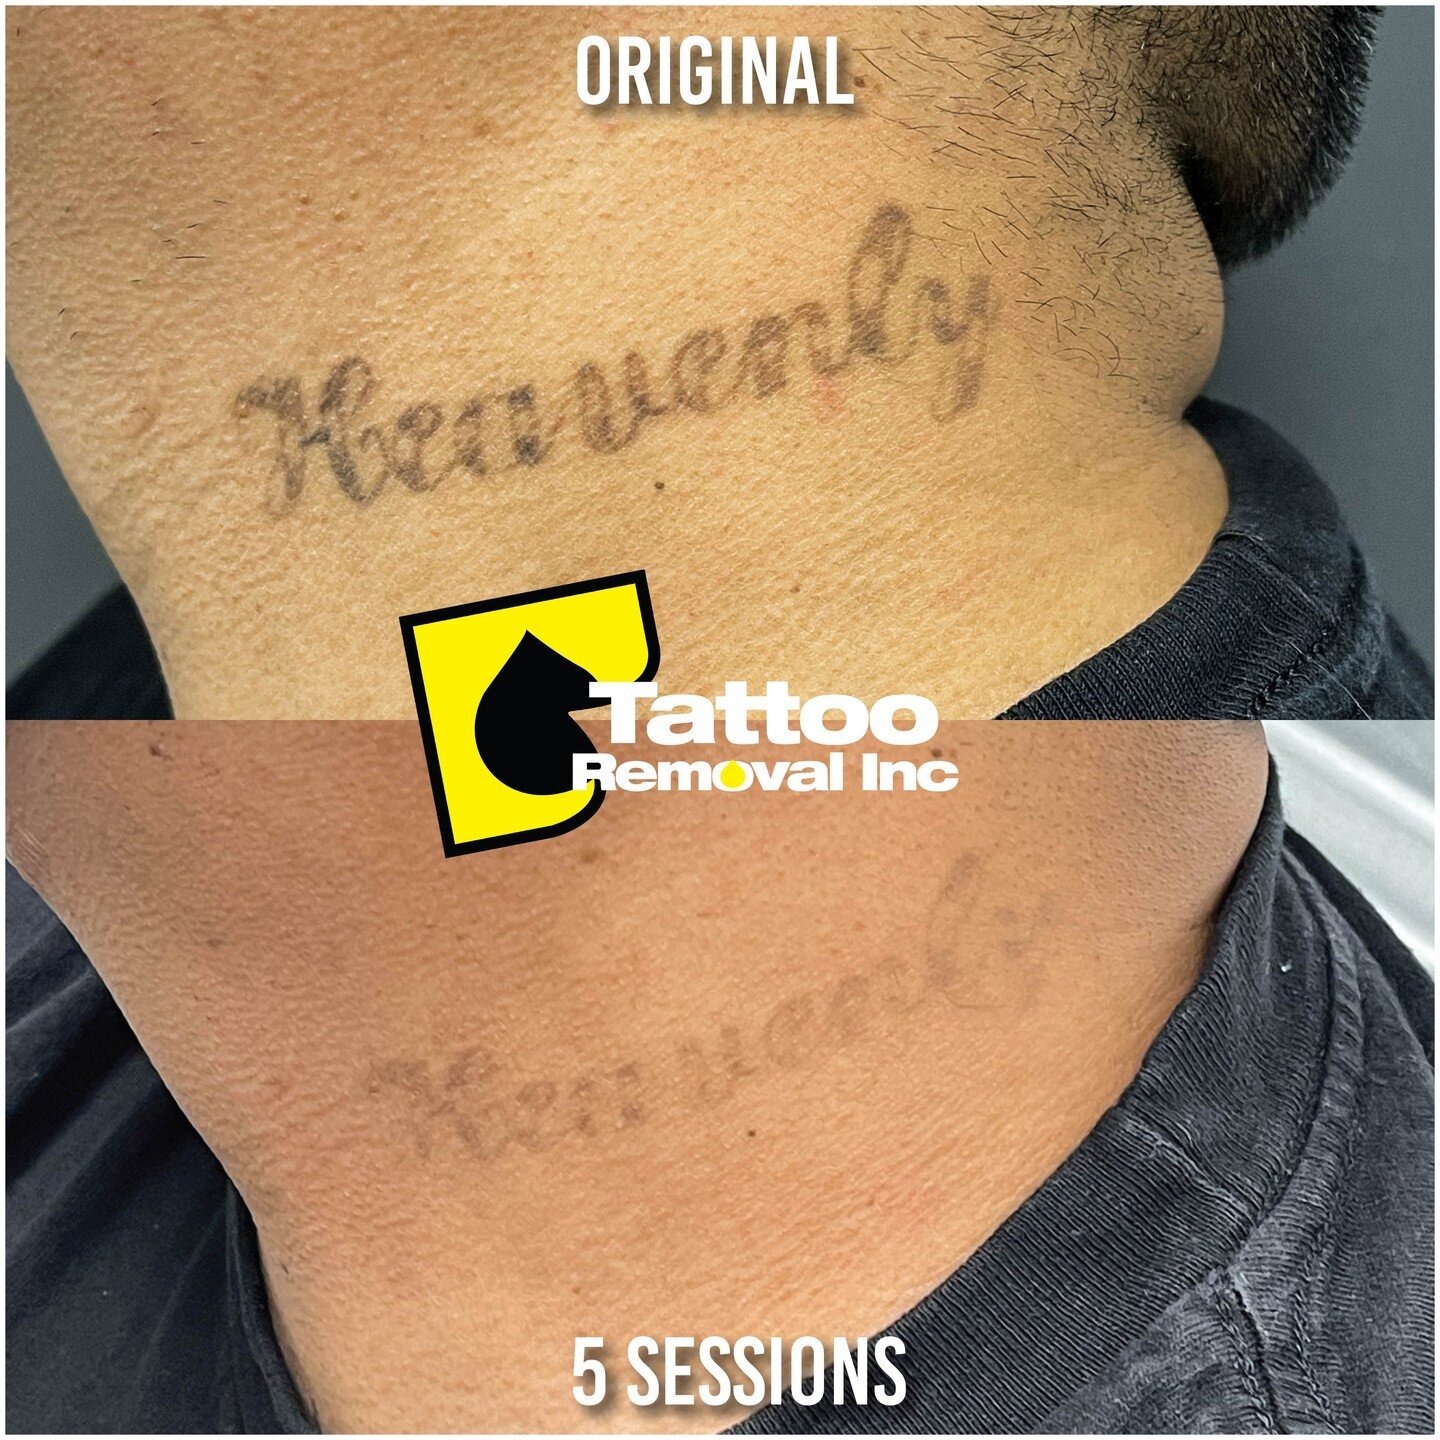 Say Goodbye to Your Unwanted Ink. Session by Session patience is key 🔑 as well as keeping with aftercare
Number of treatments depends on the age and ink type of your tattoo to determine how long it'll take to remove
*Treatment Results Vary Per Indiv